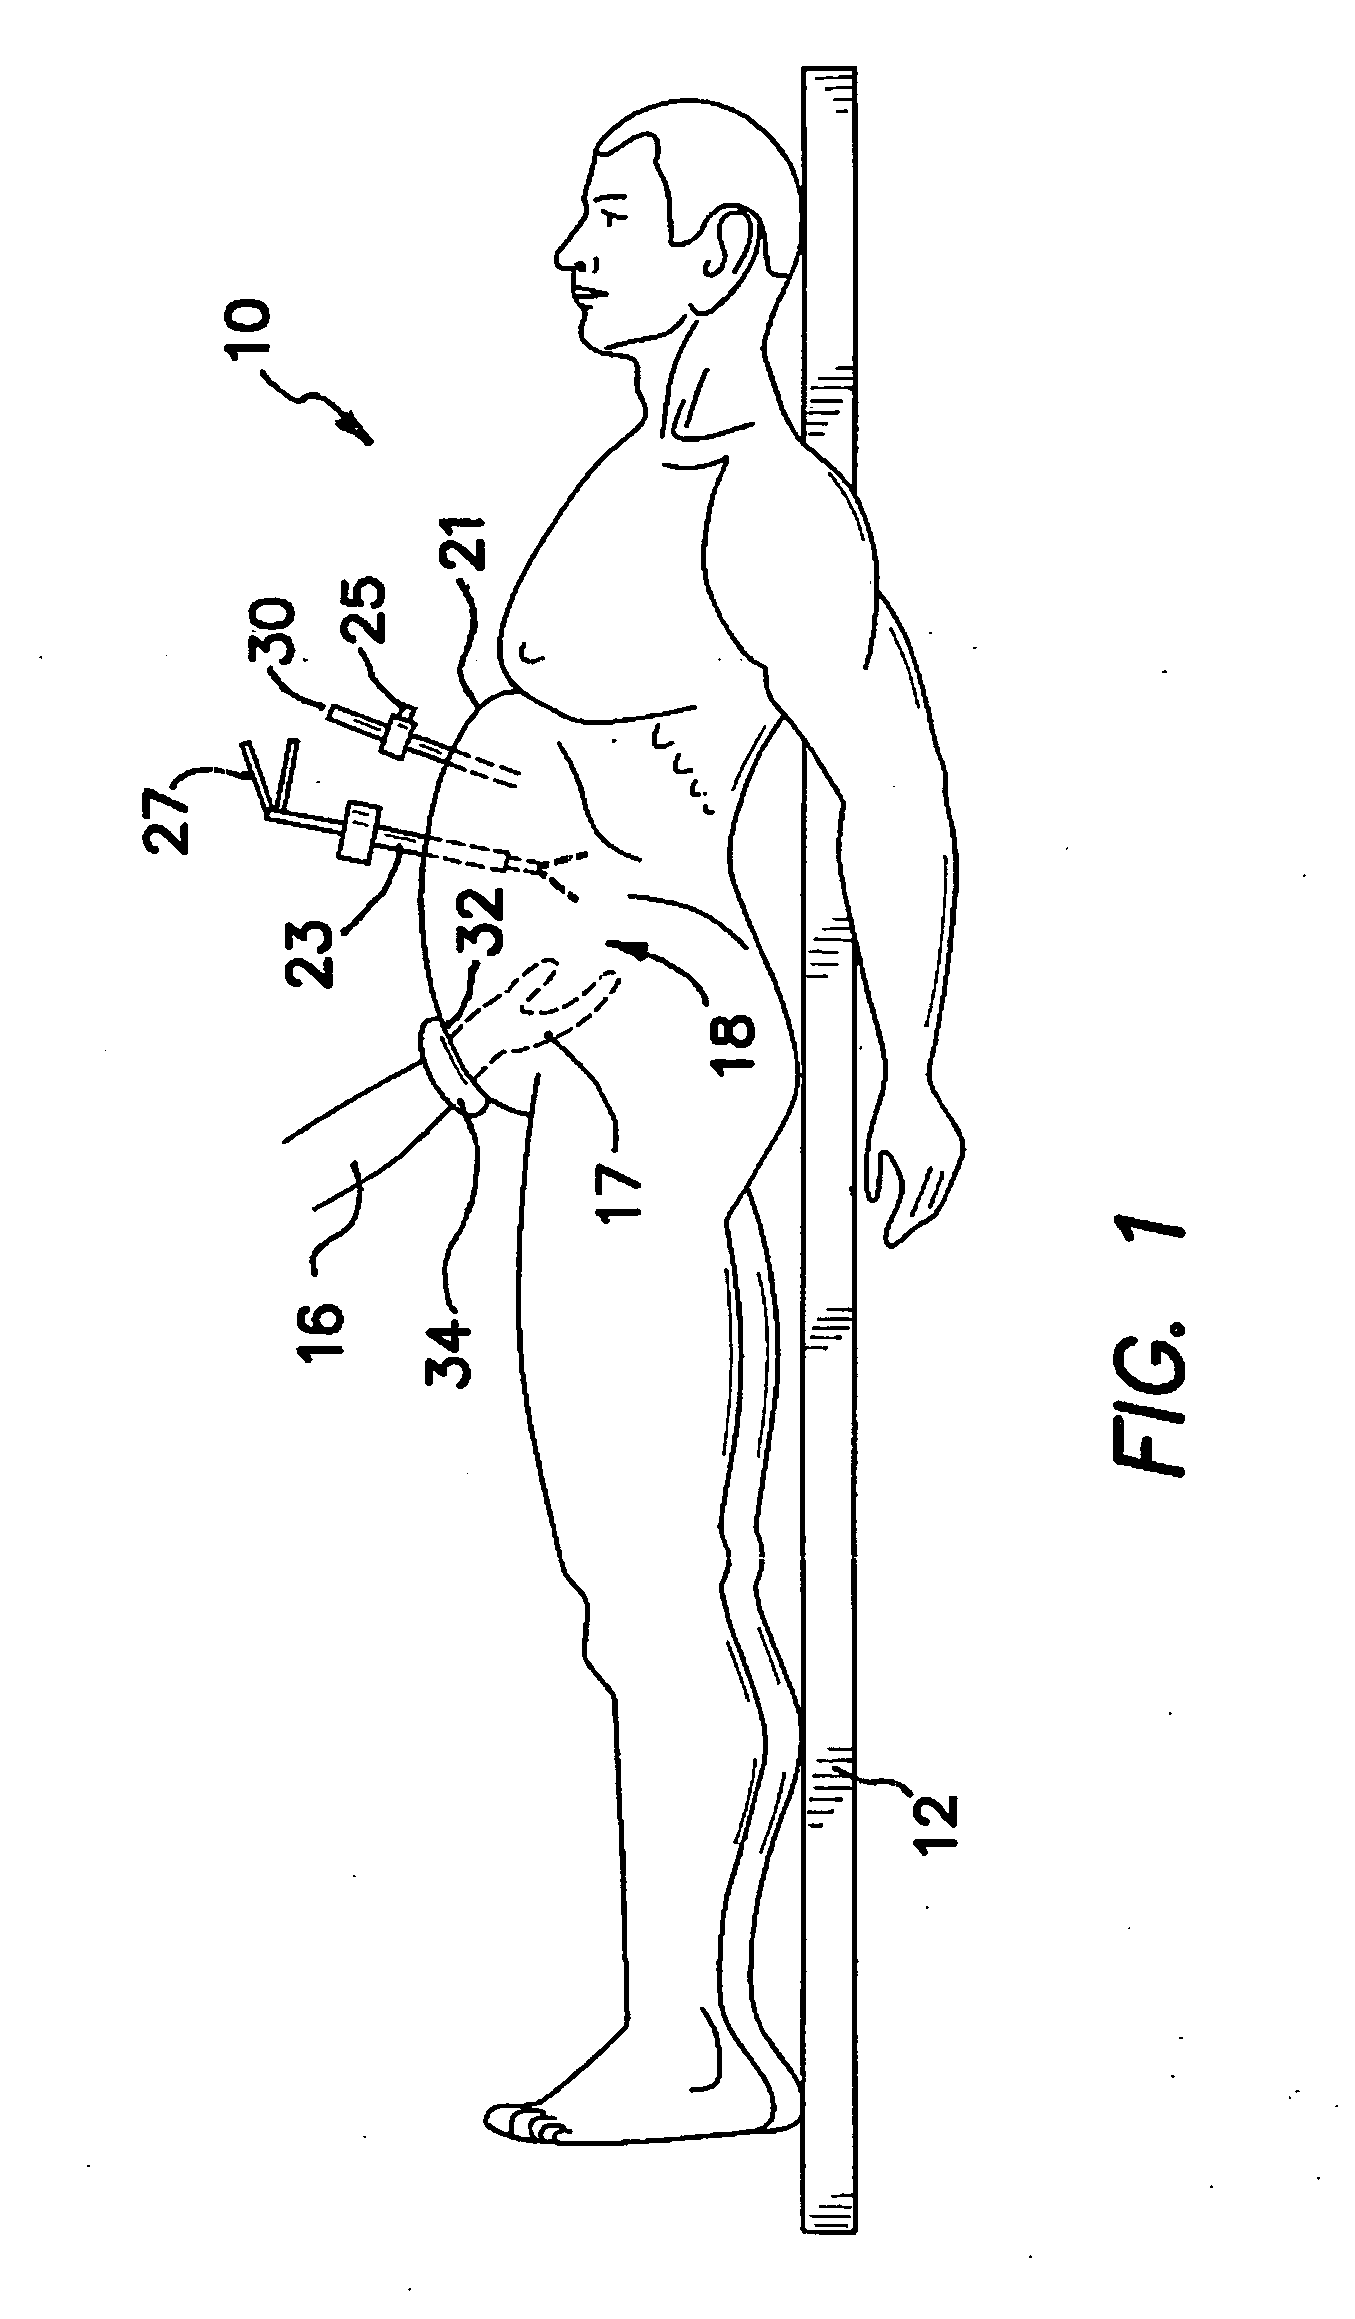 Surgical access system